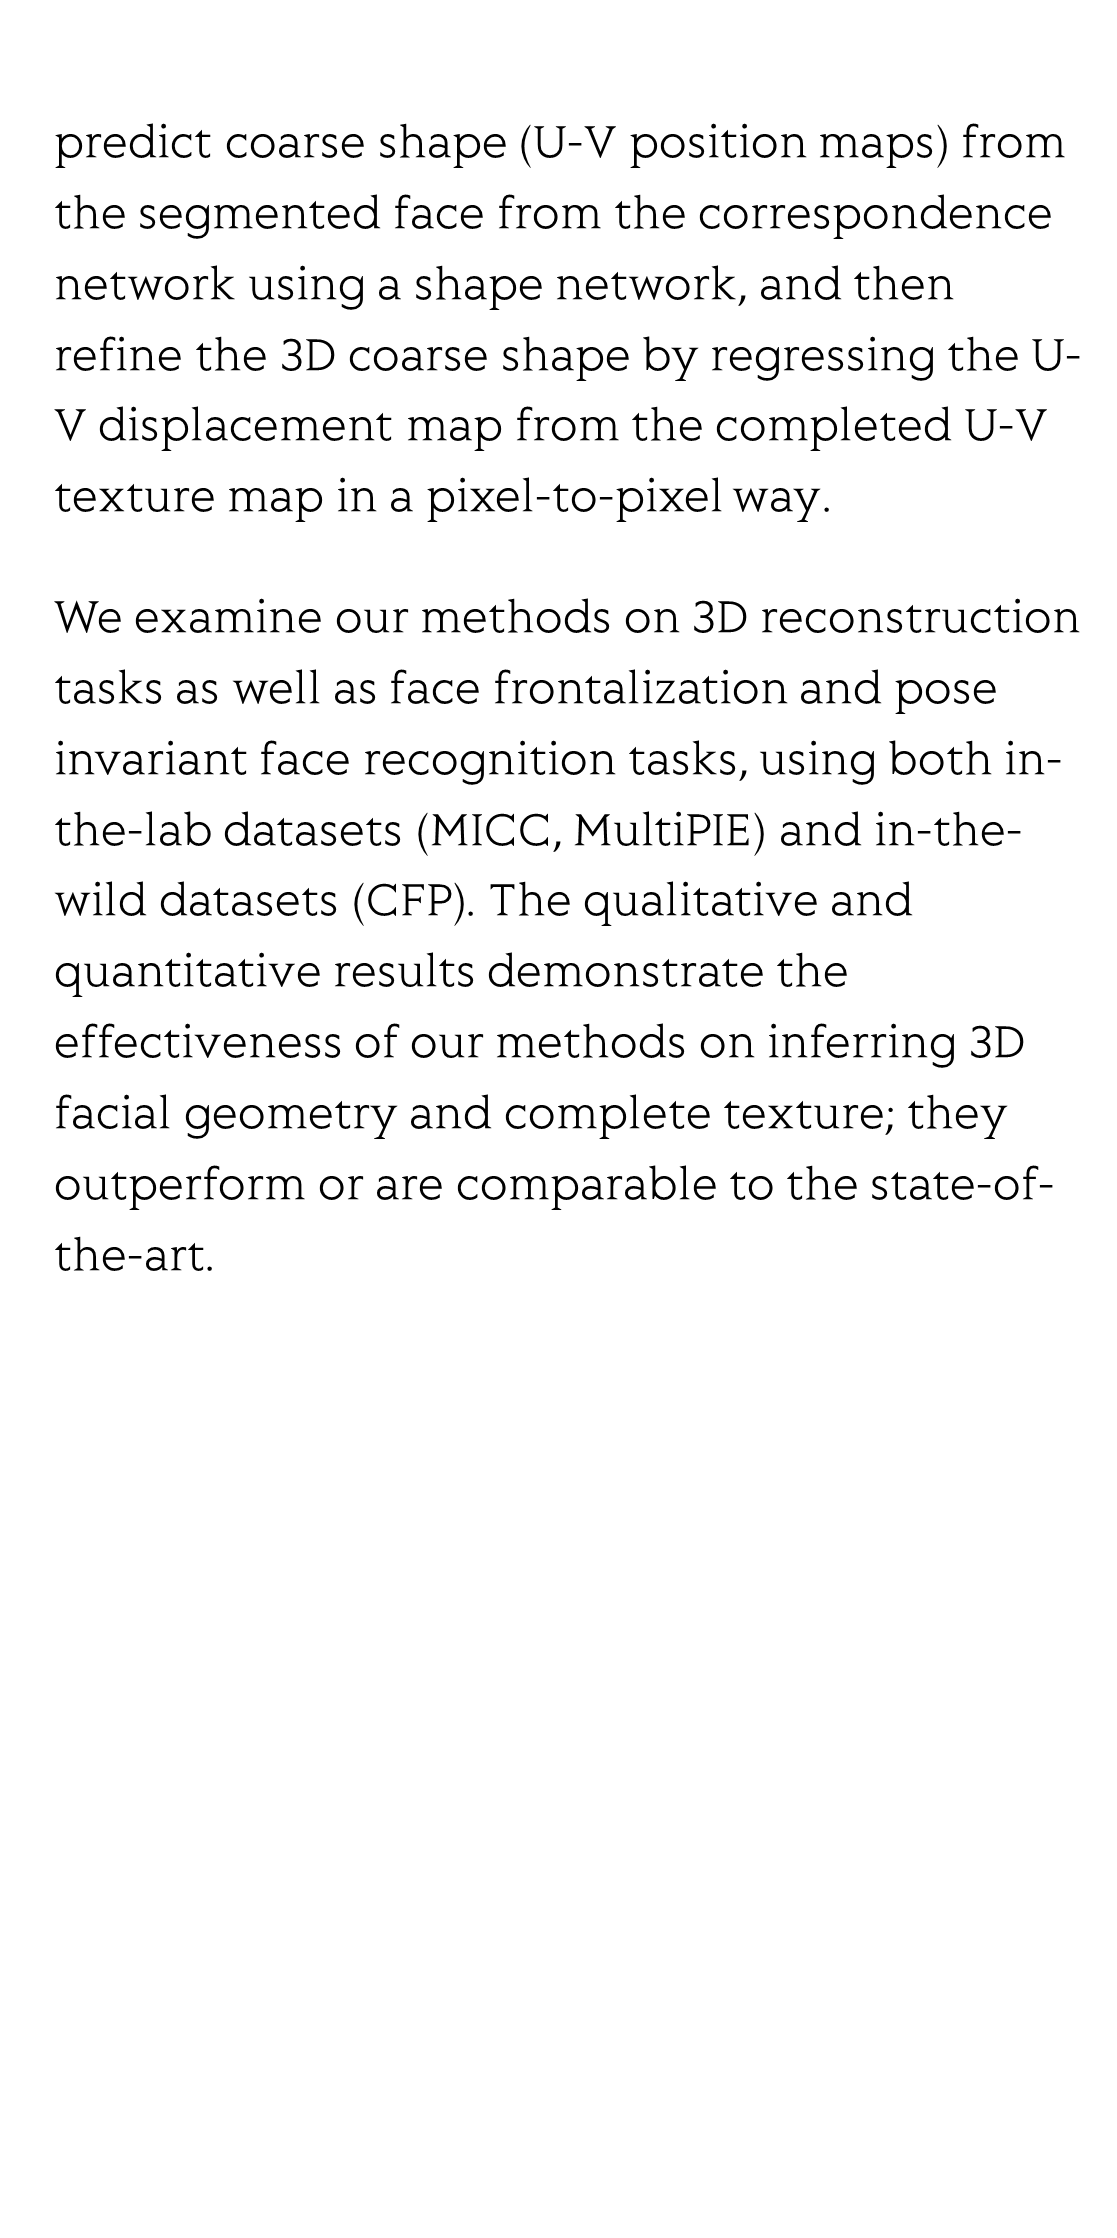 Joint 3D facial shape reconstruction and texture completion from a single image_3